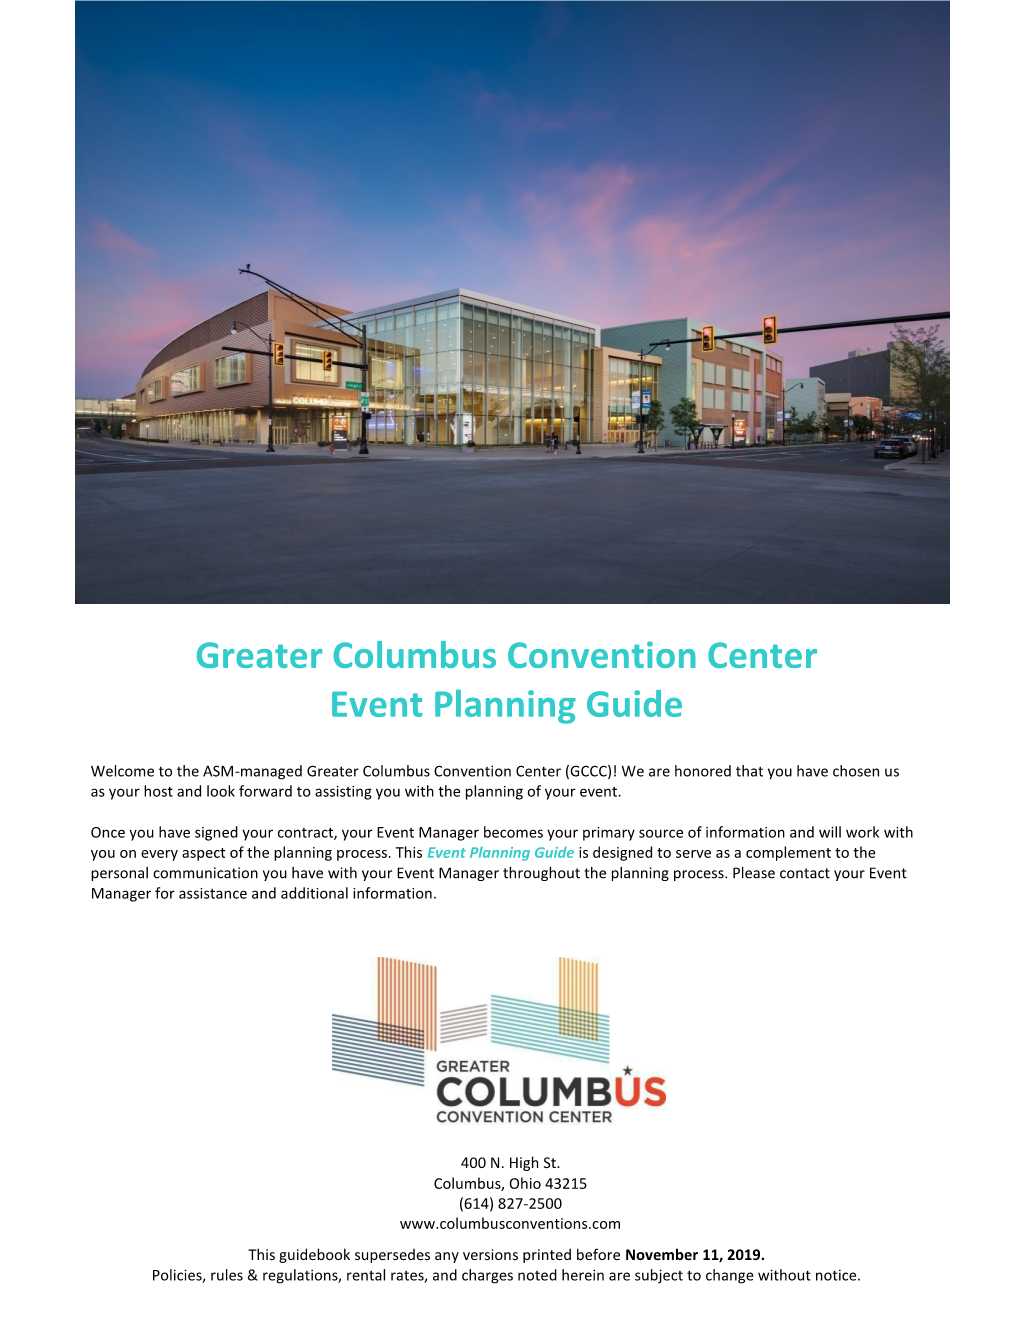 Greater Columbus Convention Center Event Planning Guide